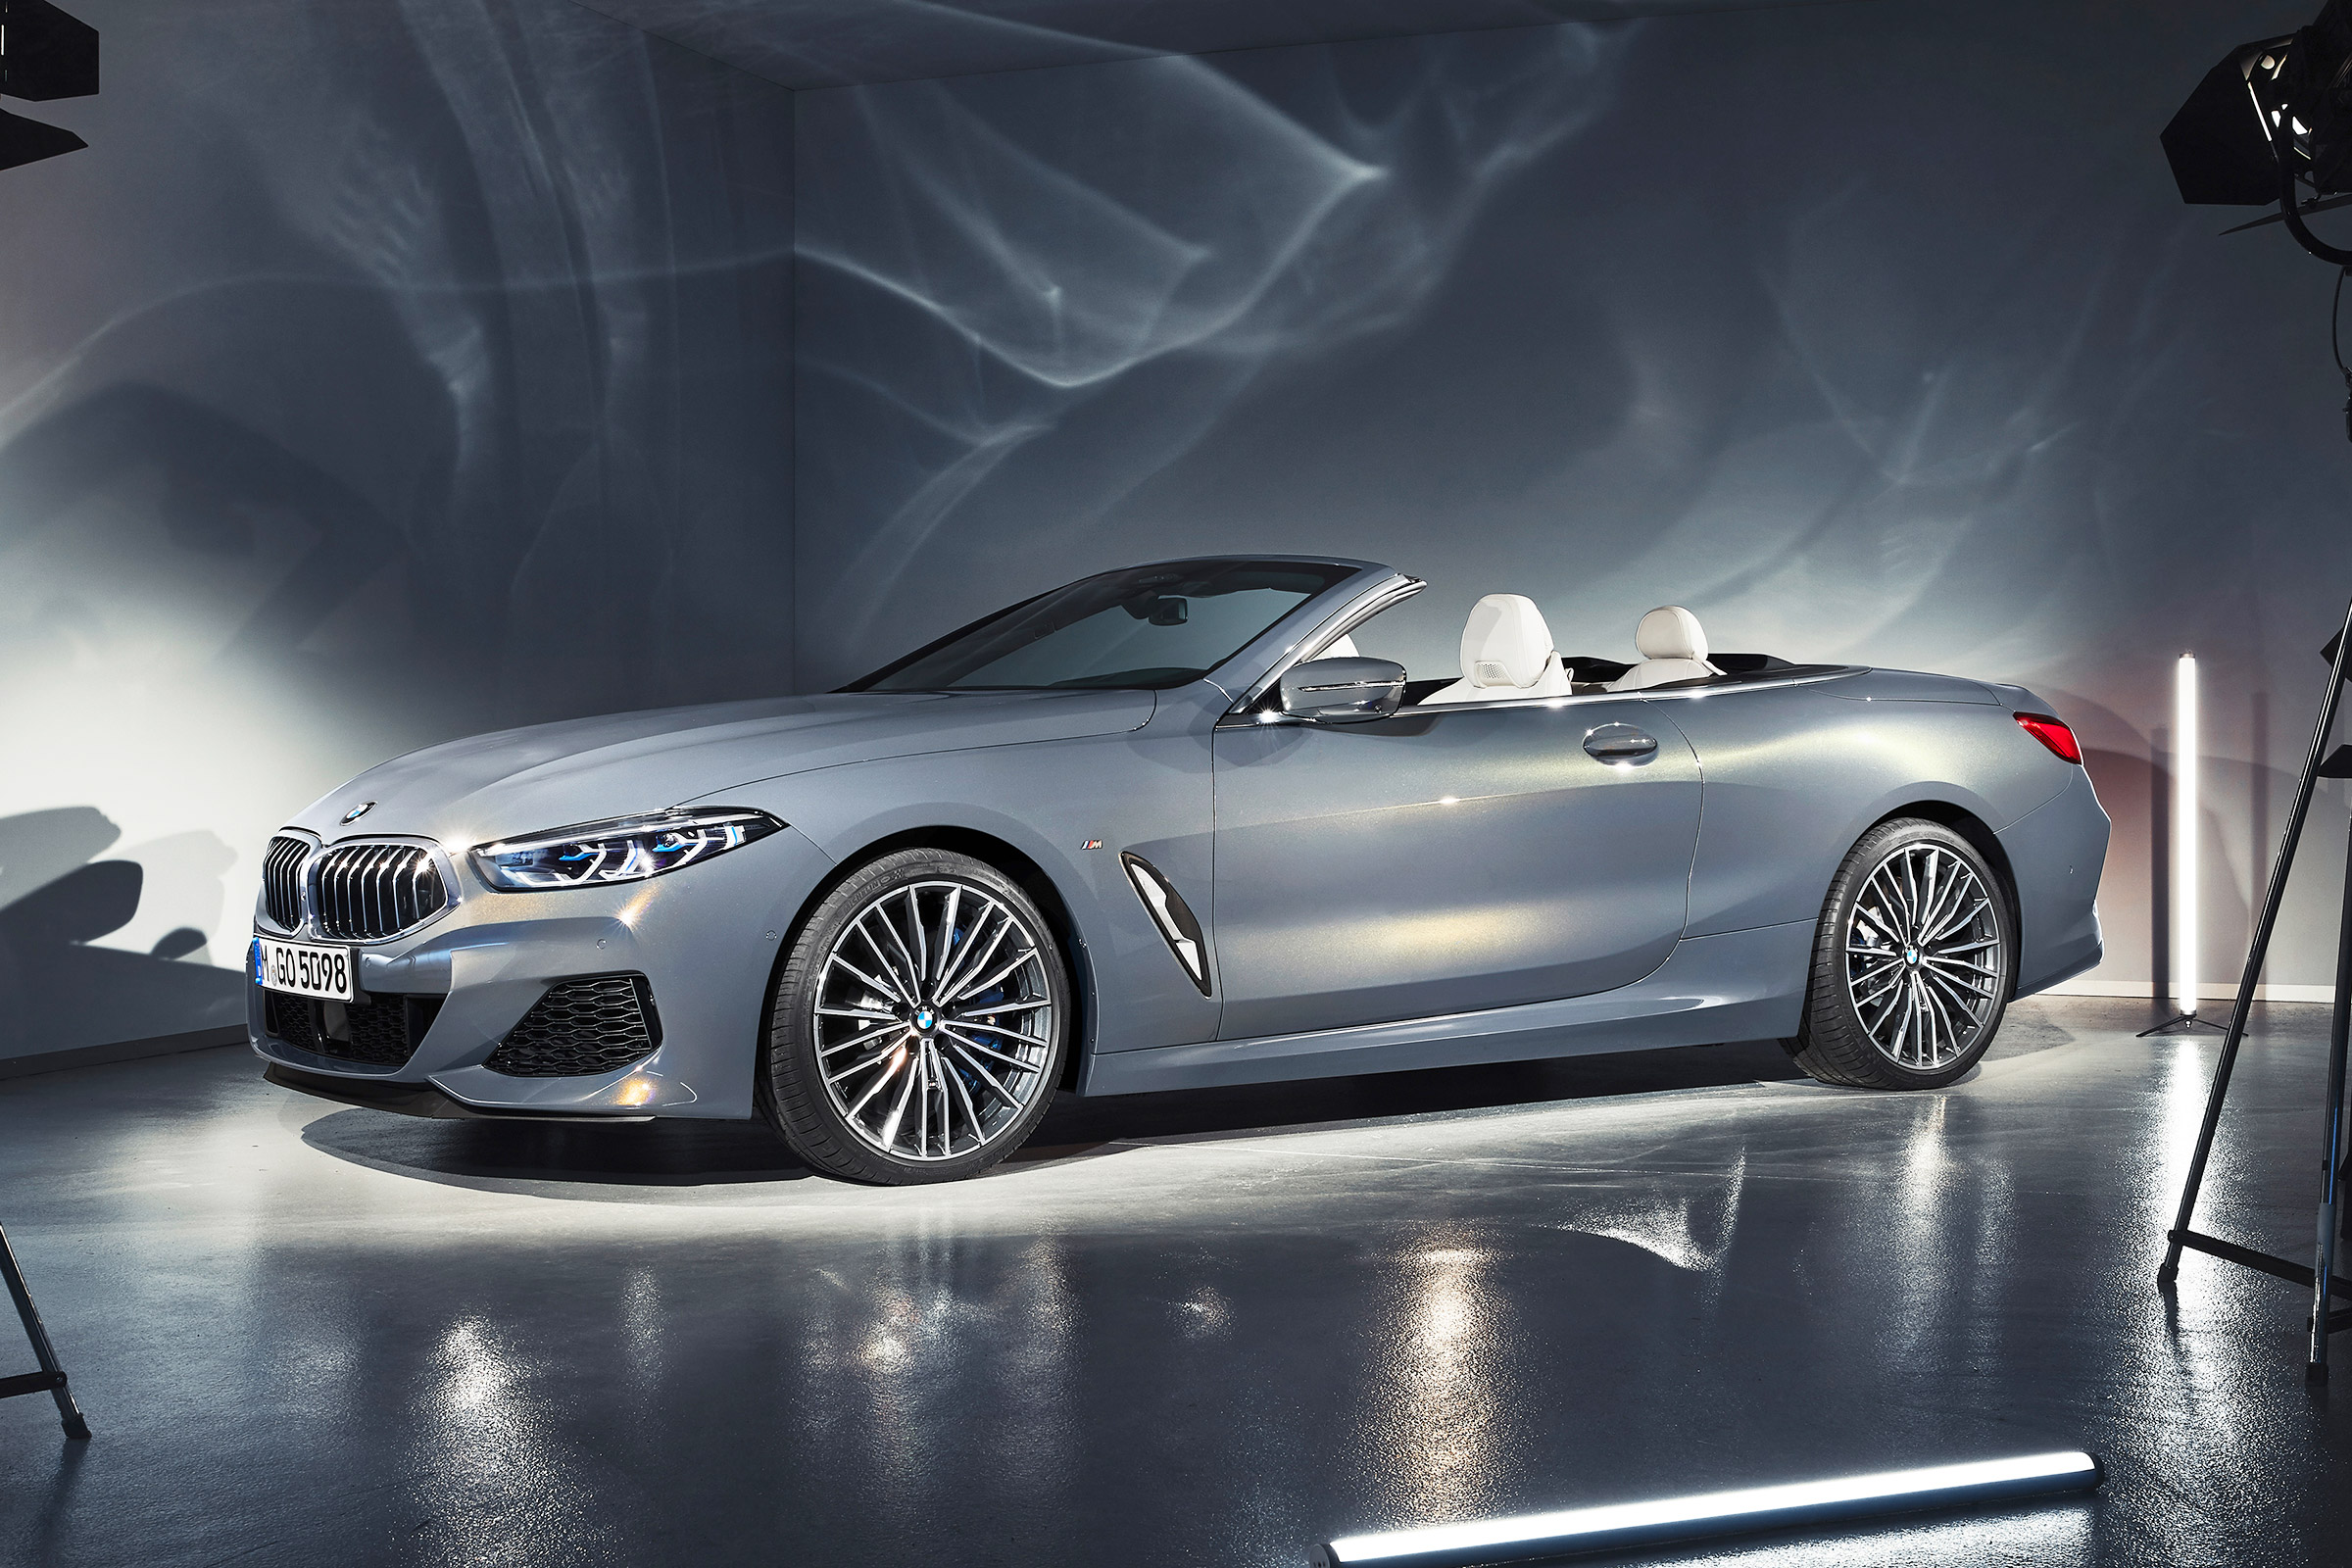 Unrivaled Luxury: The 2019 BMW 8 Series Convertible